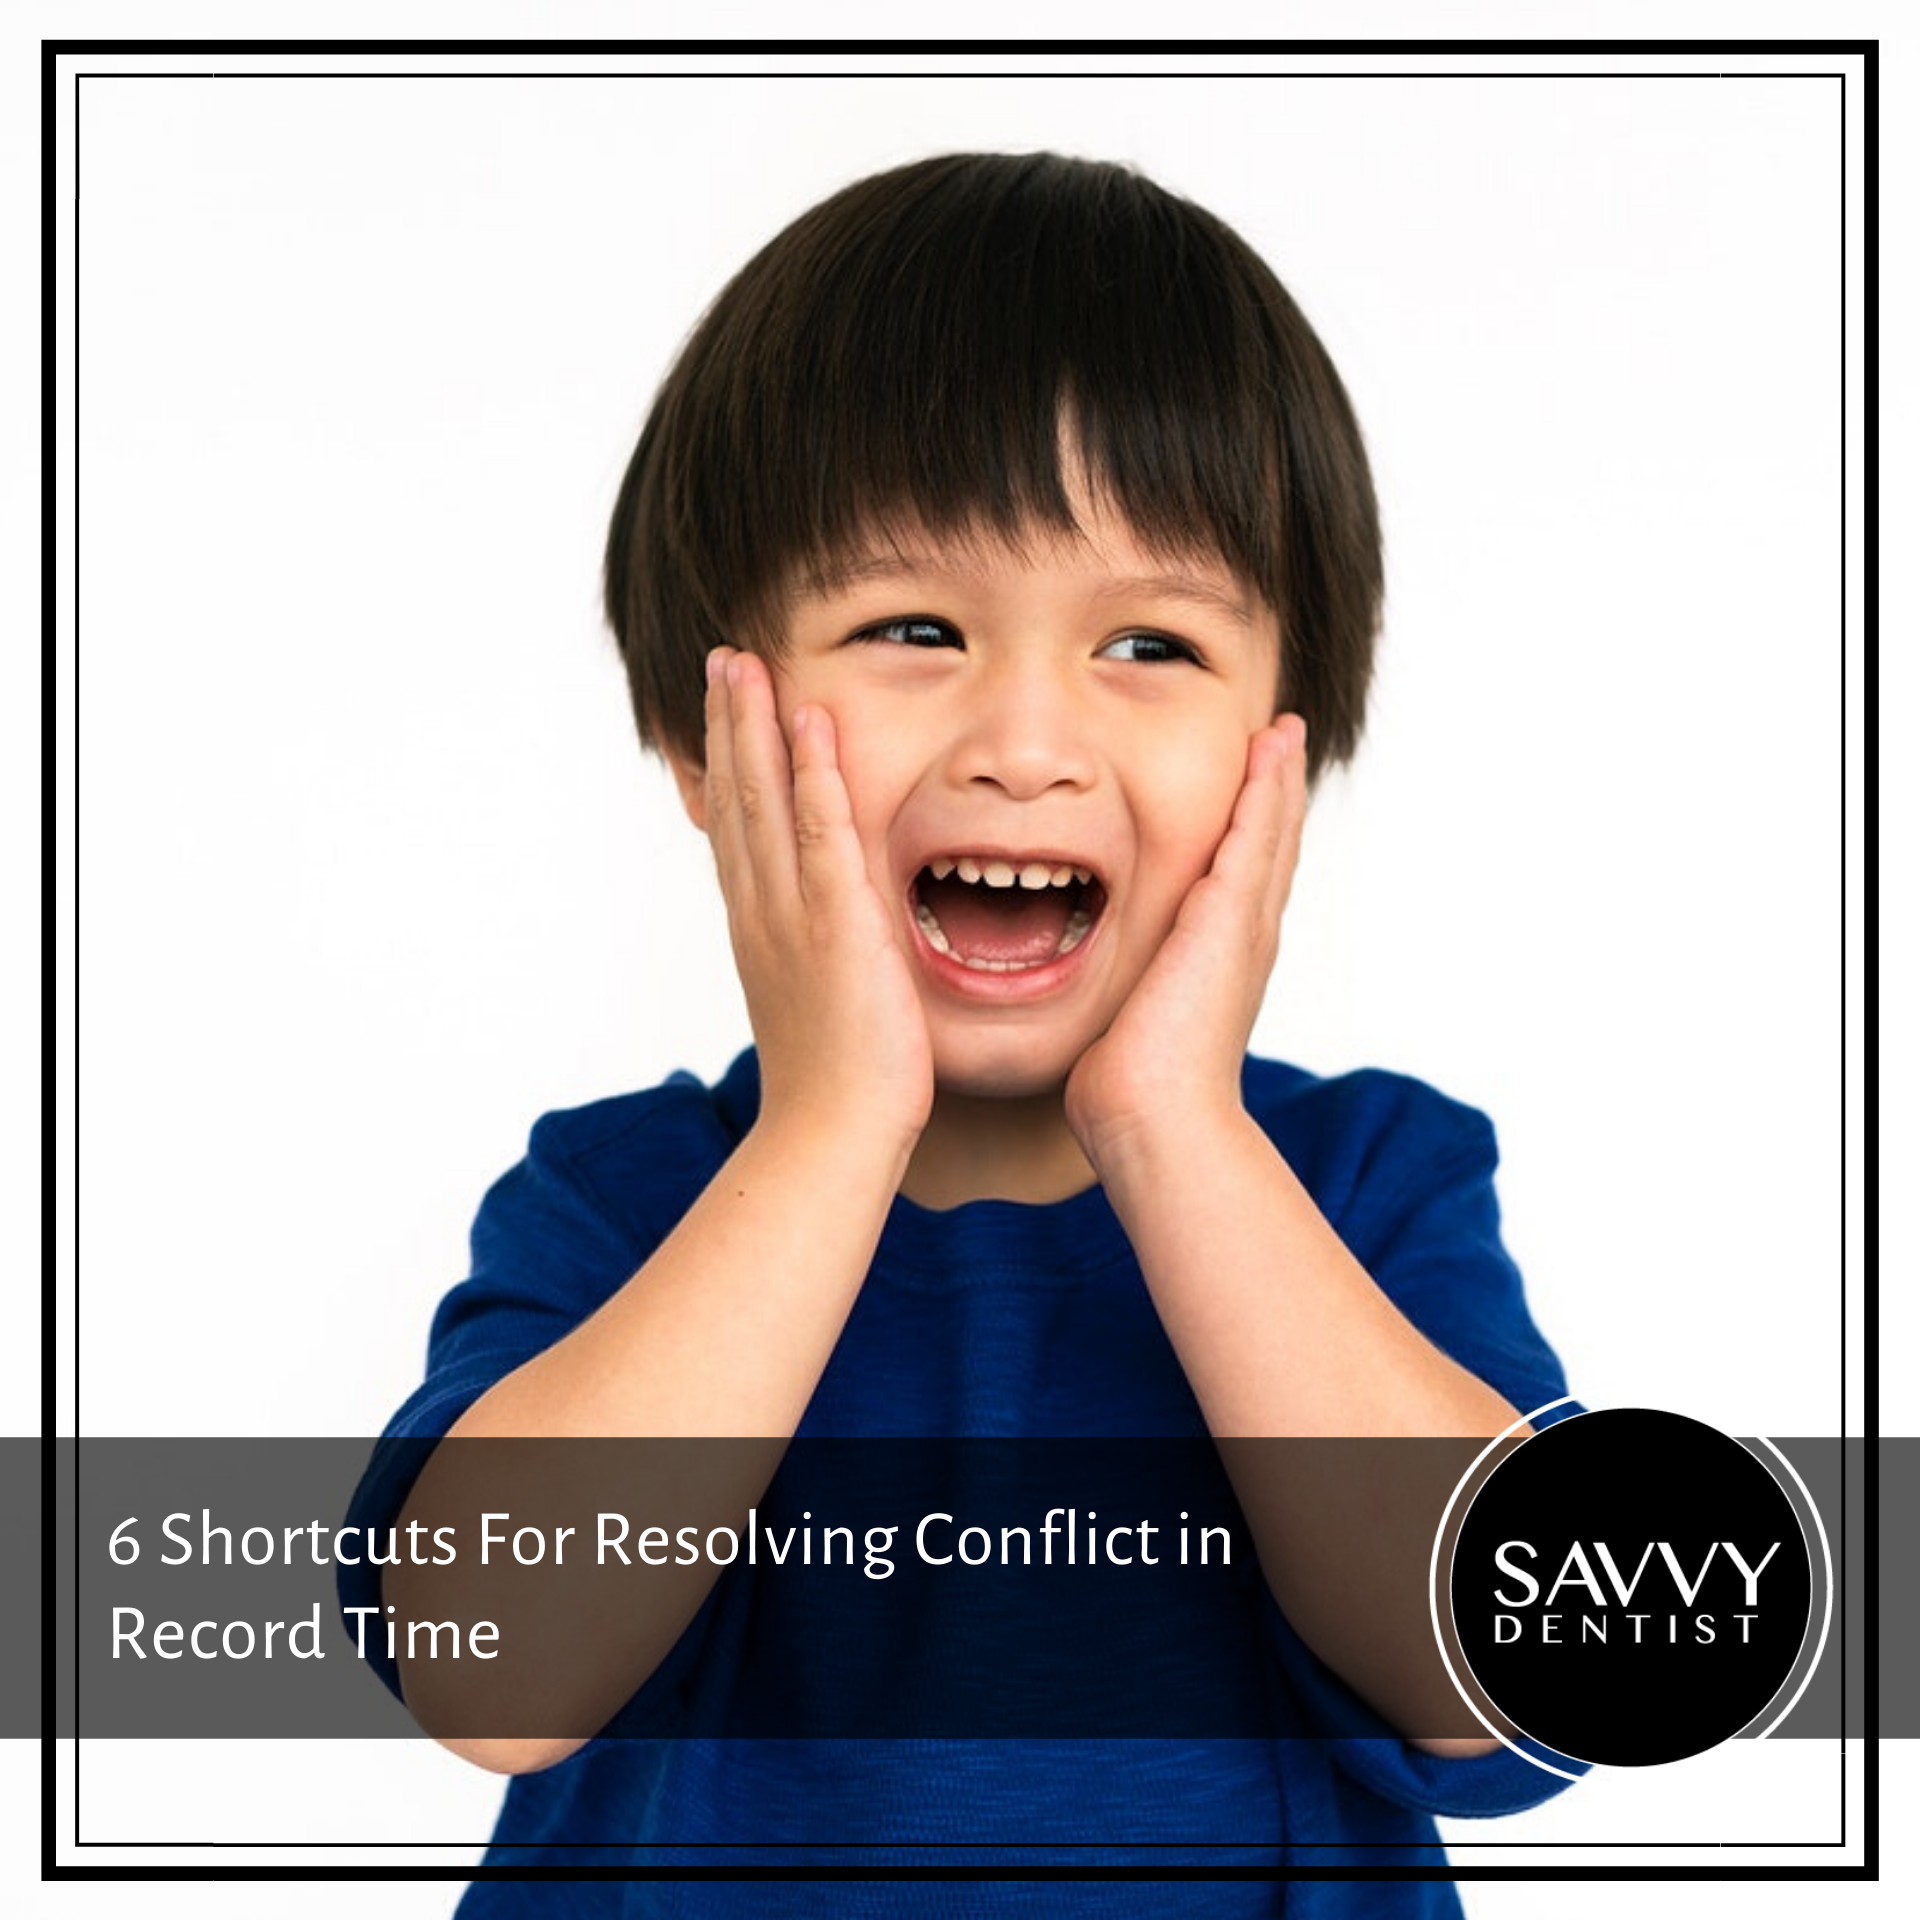 6 Shortcuts For Resolving Conflict in Record Time